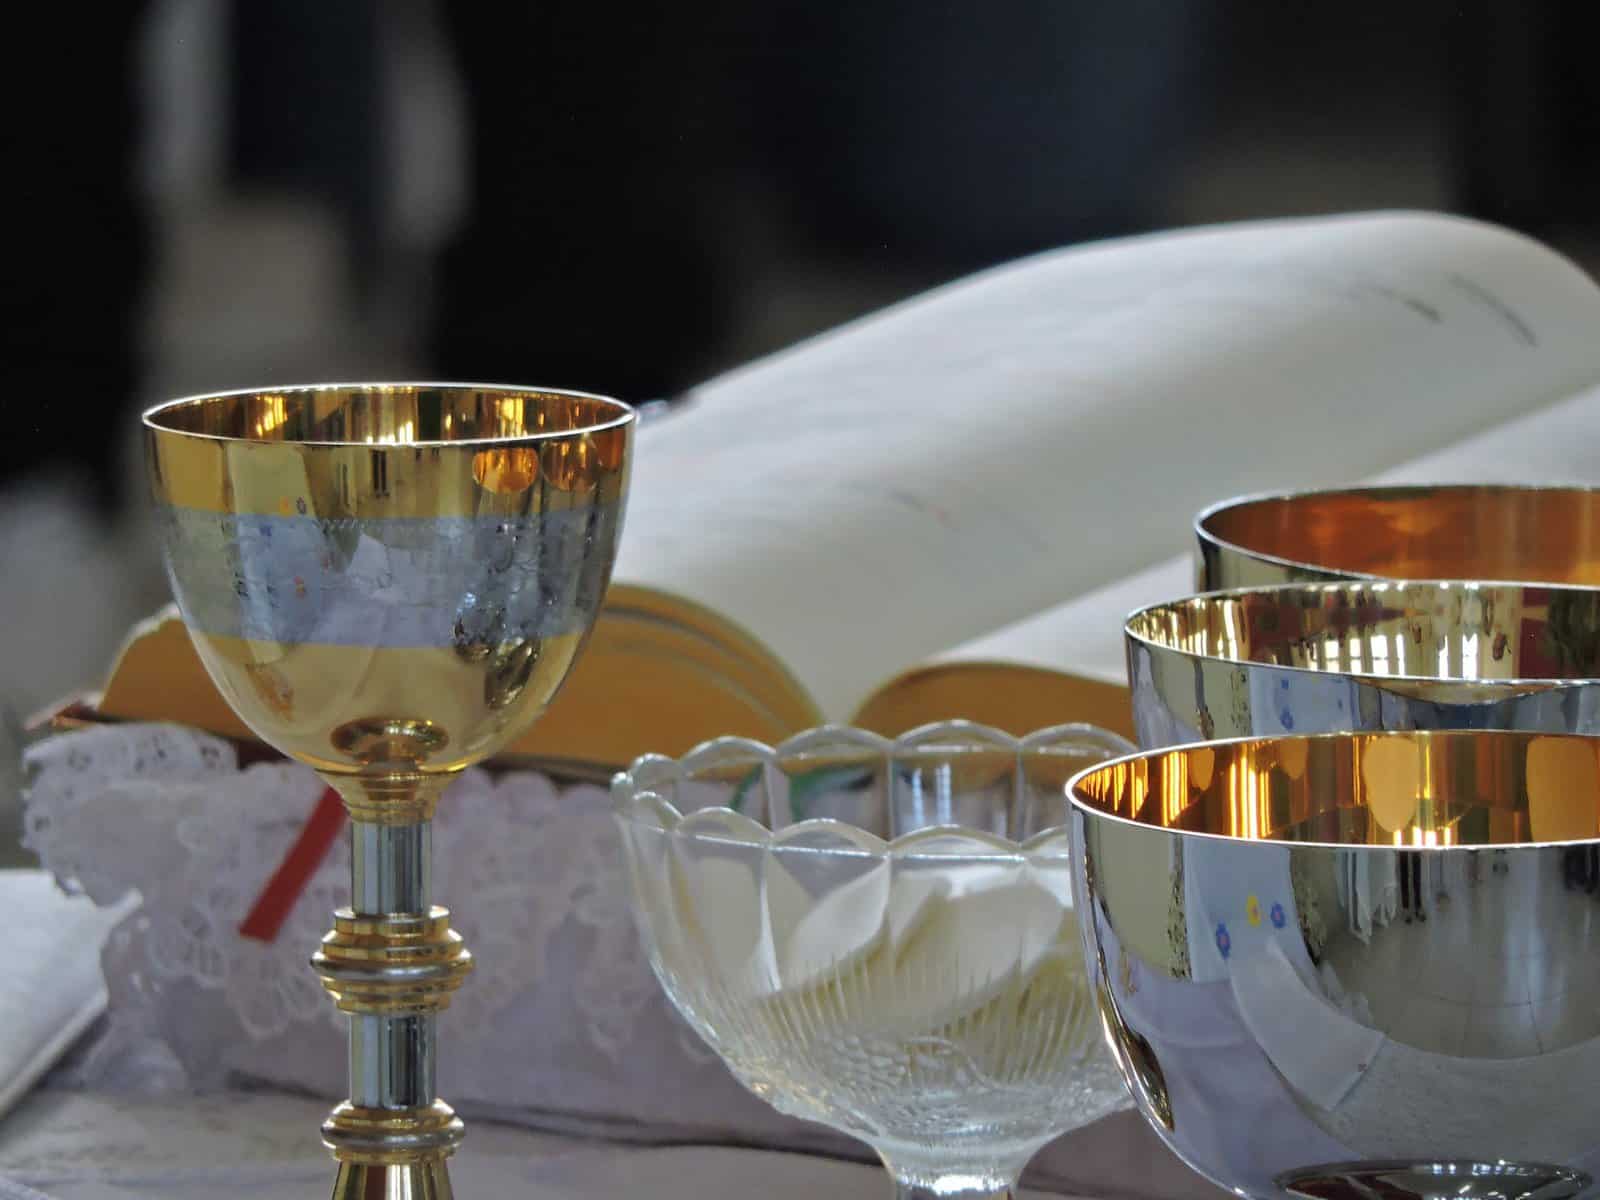 silver chalice, a bible, and a glass bowl with communion bread